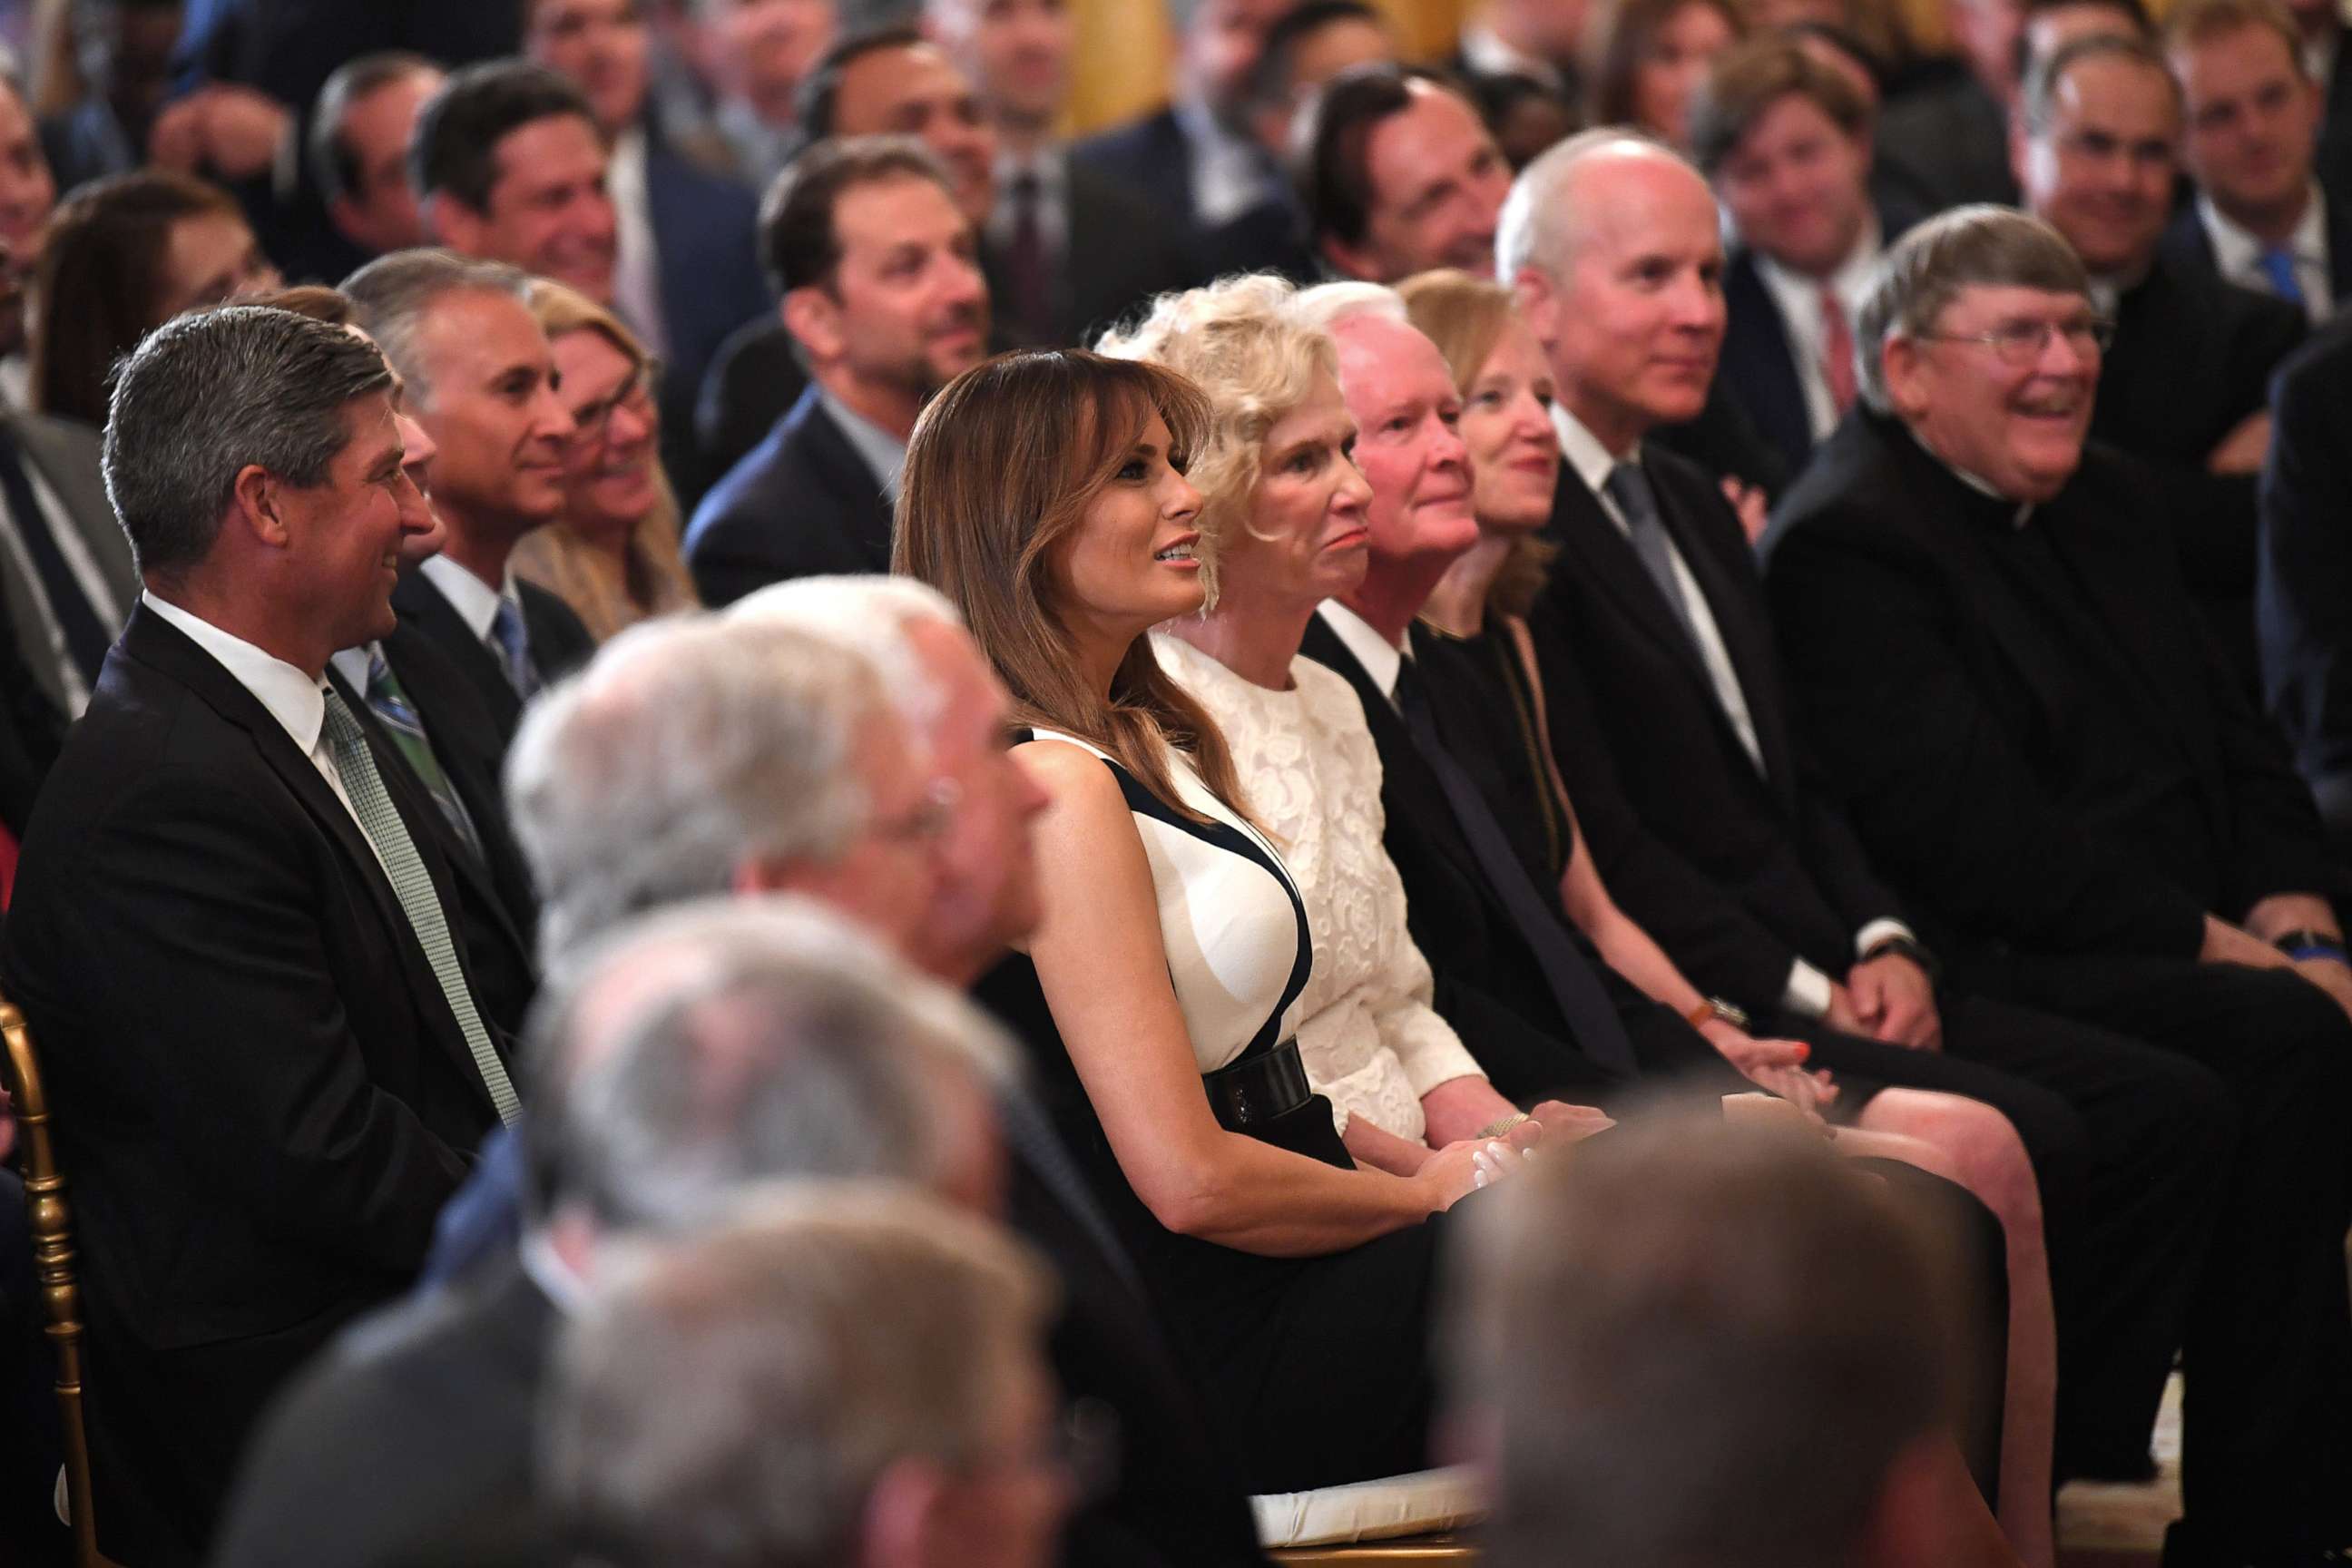 PHOTO: First lady Melania Trump sits next to Martha Kavanaugh, mother of Supreme Court nominee Brett Kavanaugh, during the announcement of his nomination by President Donald Trump at the White House, July 9, 2018.